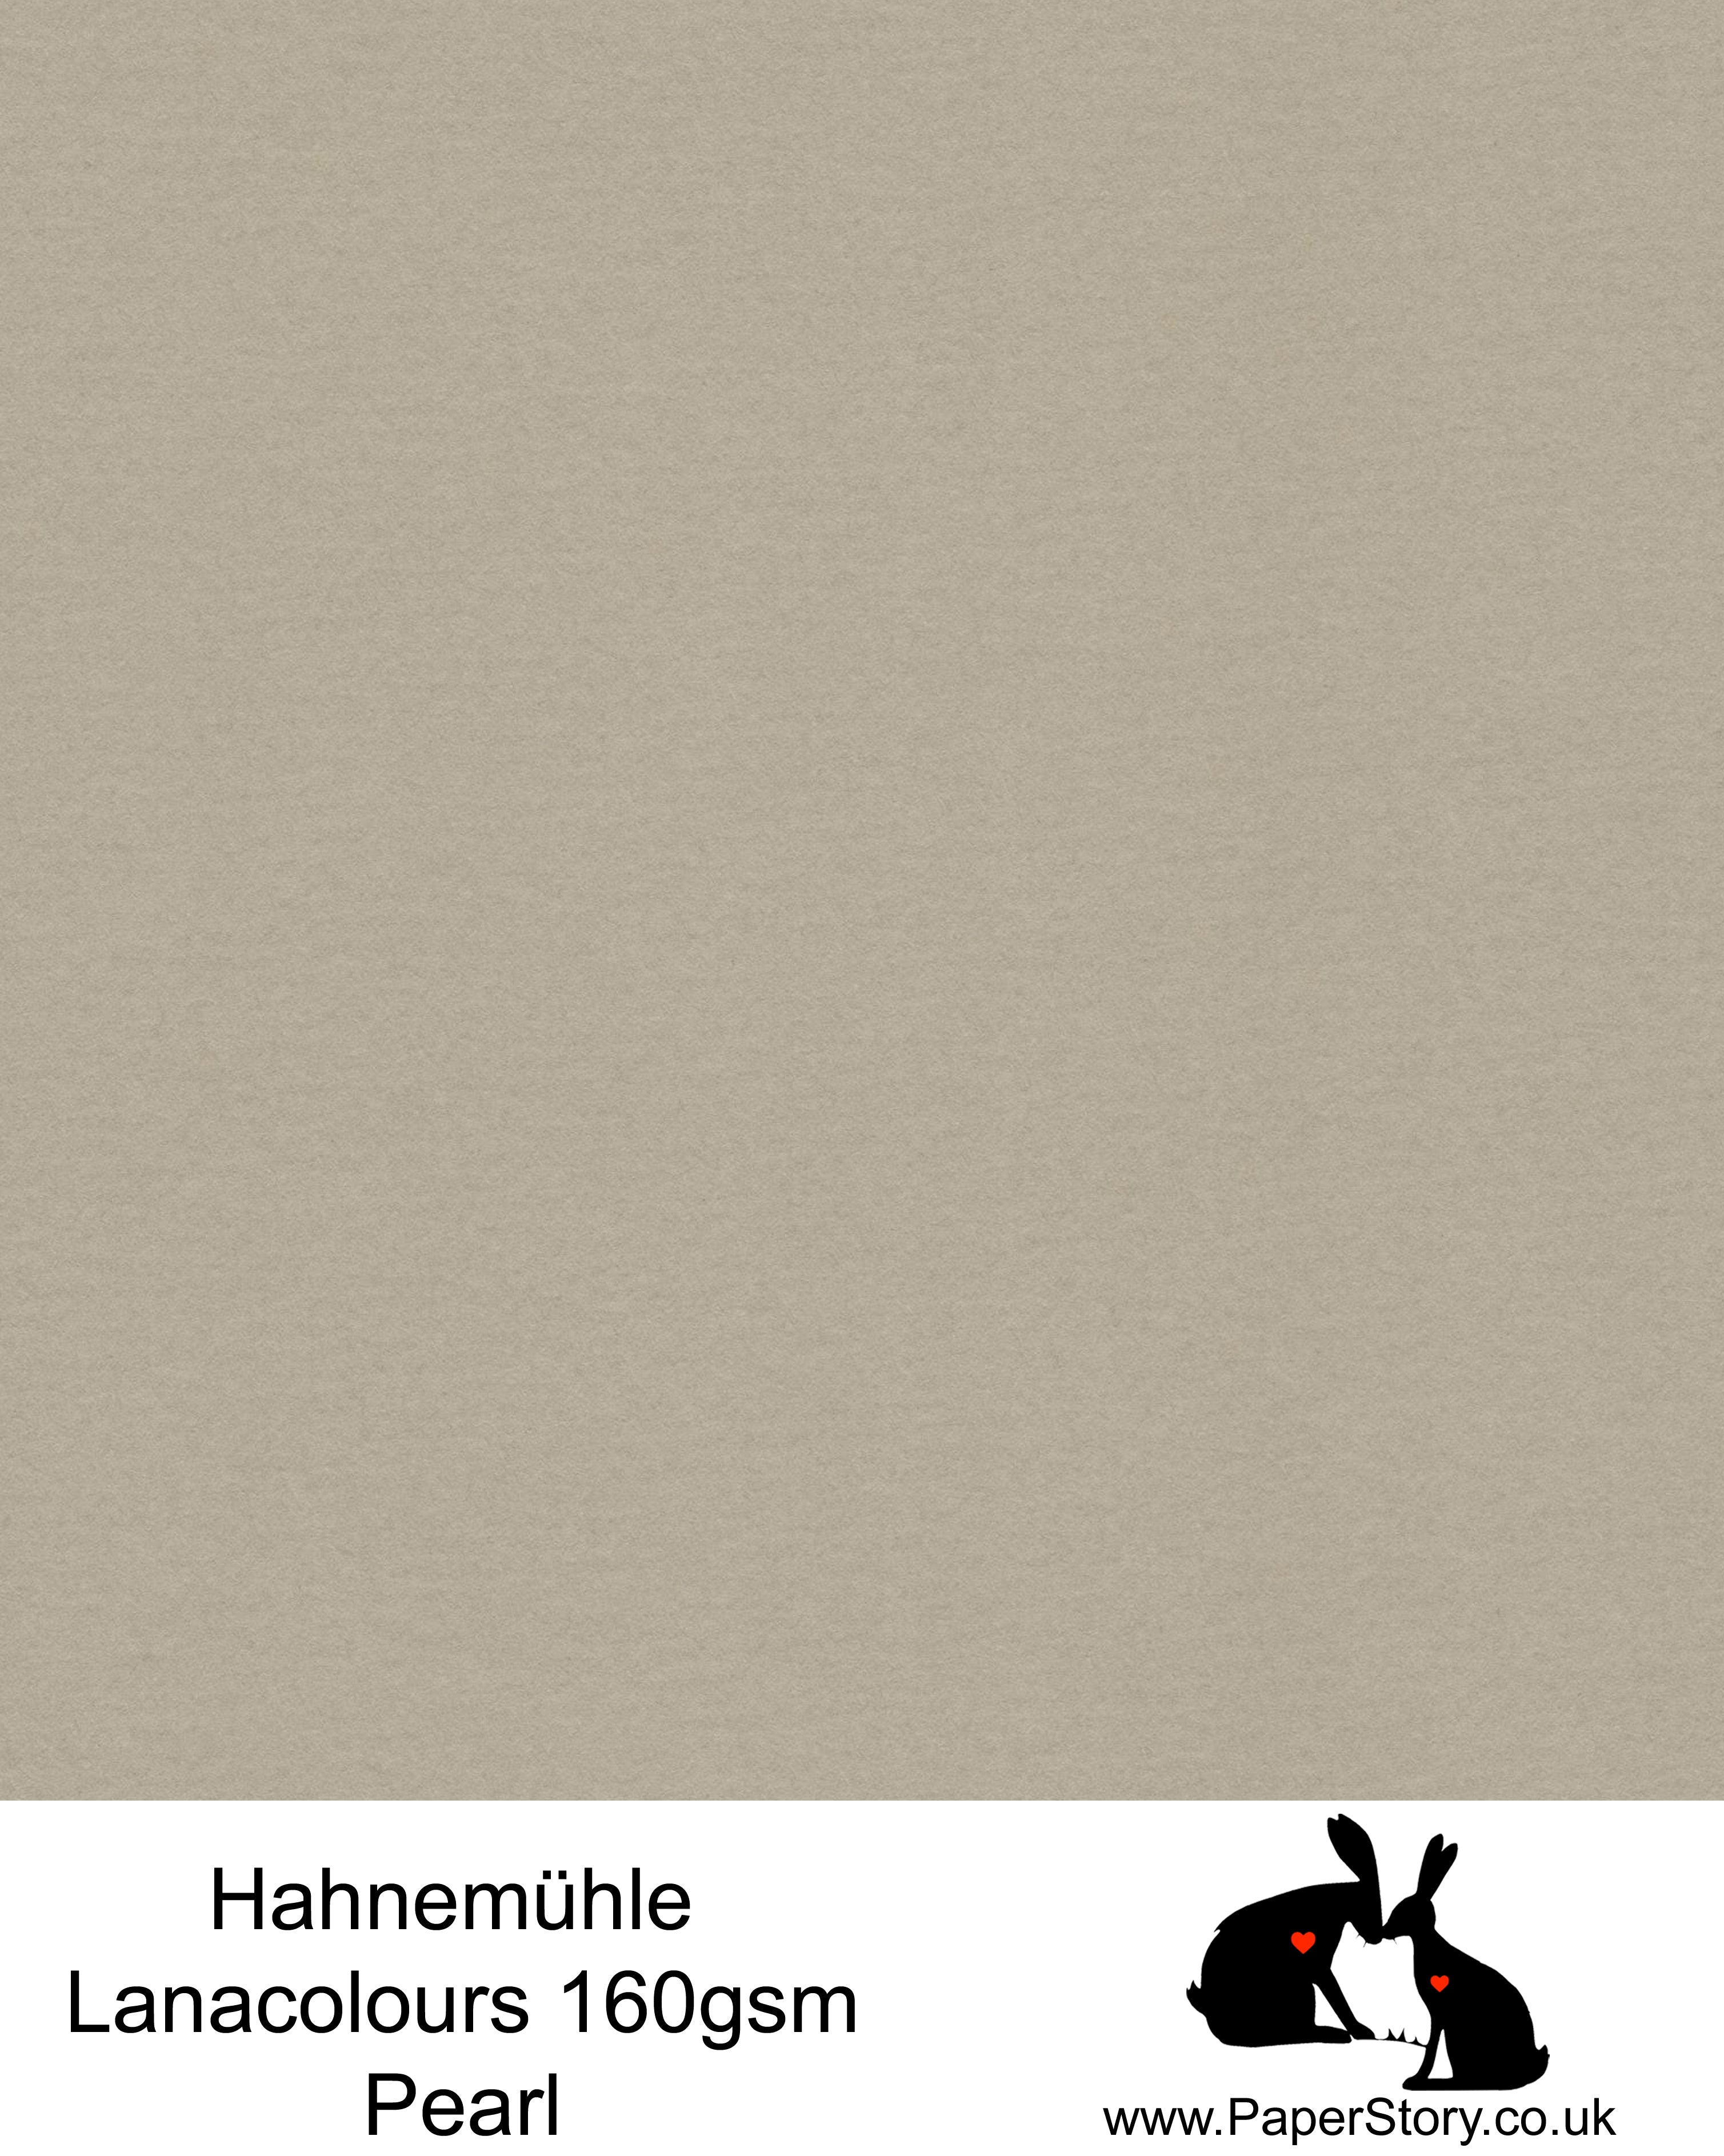 Hahnemühle Lana Colours Pearl warm grey/brown pastel hammered paper 160 gsm. Artist Premium Pastel and Papercutting Papers 160 gsm often described as hammered paper